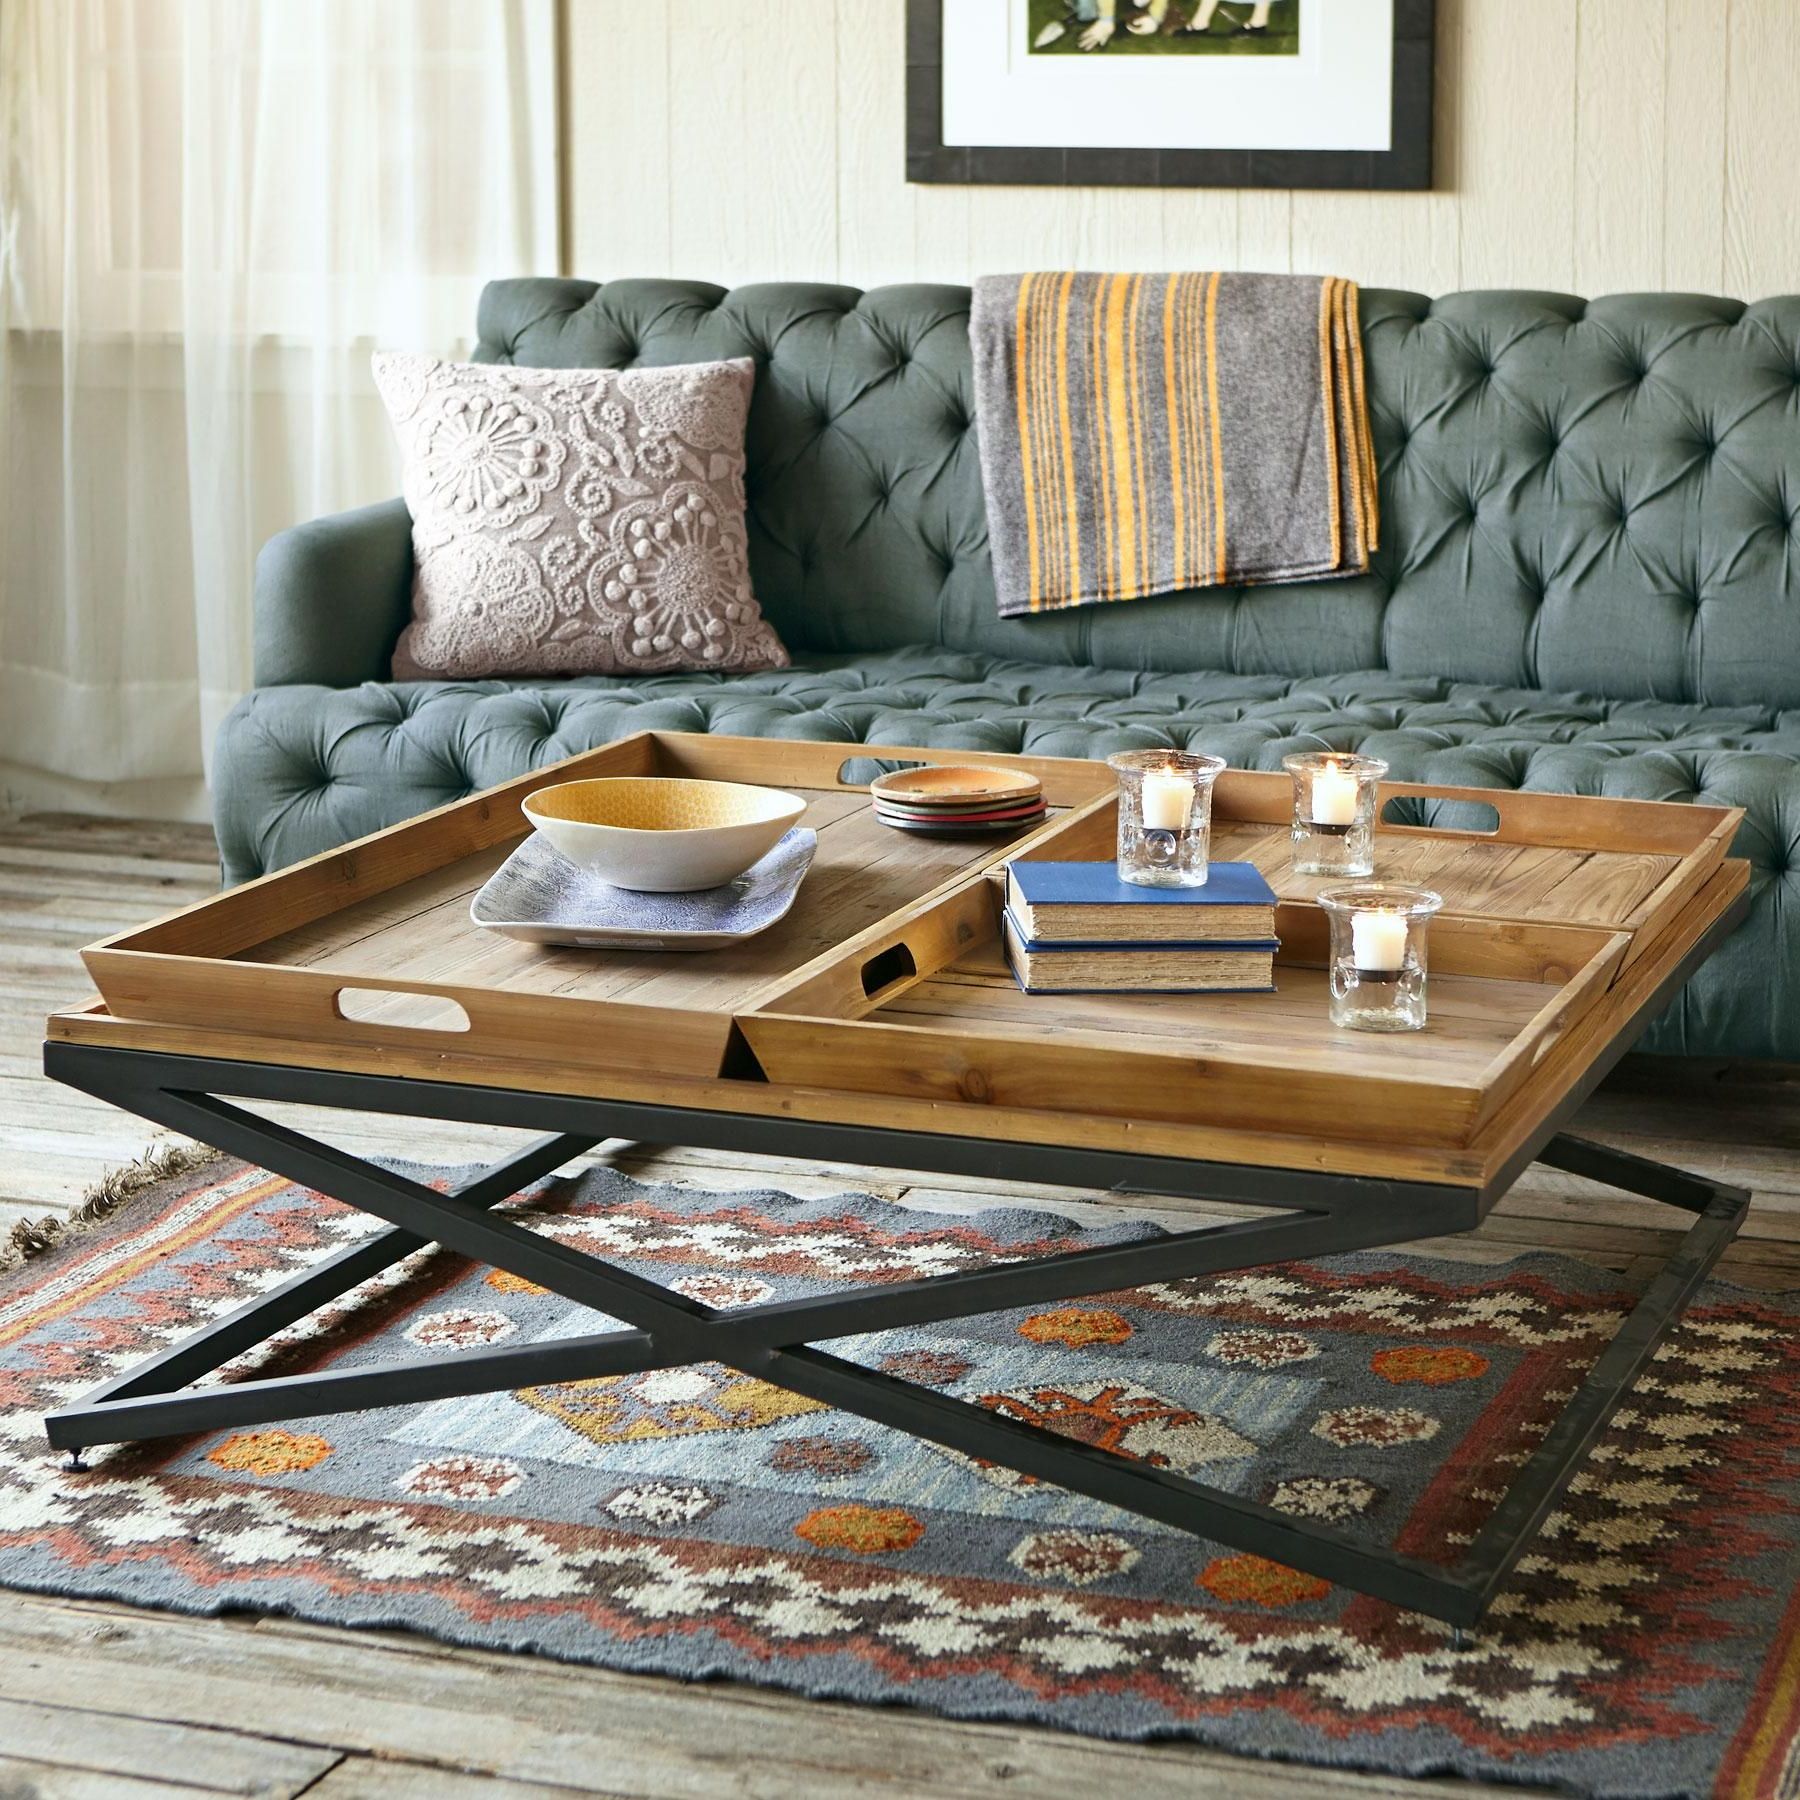 Tray Coffee Table: A Versatile And Stylish Addition To Your Home Inside Most Recent Coffee Tables With Trays (View 2 of 15)